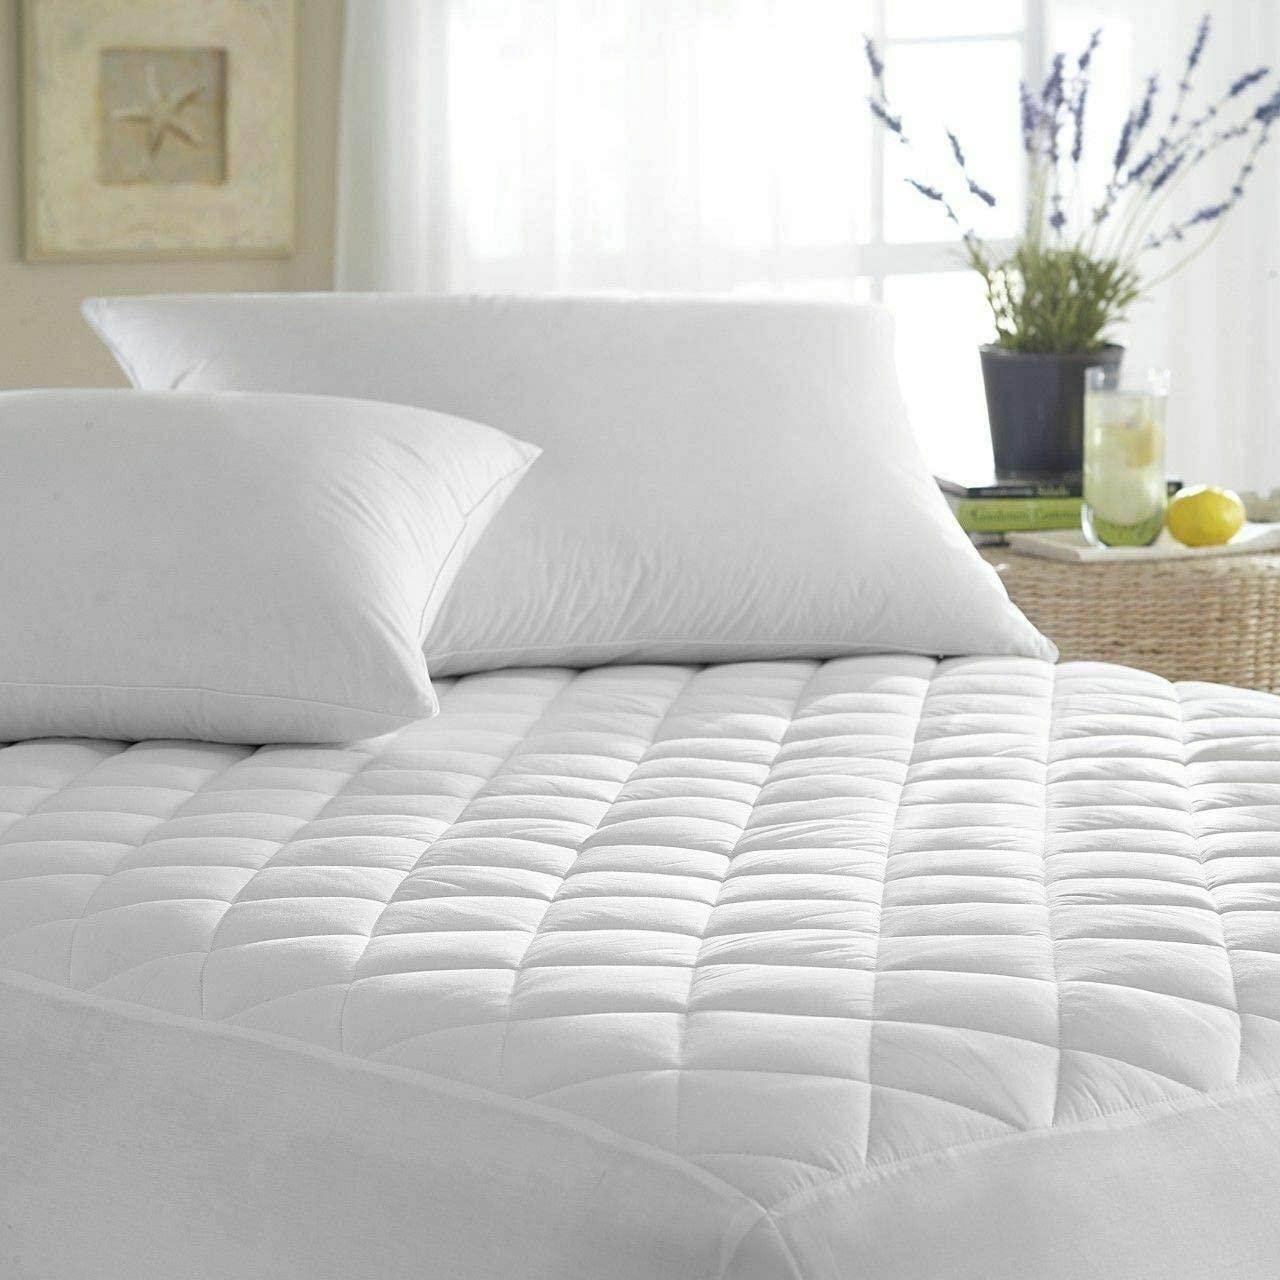 Jasmin Elinor Quilted Waterproof Mattress Protector Cover Extra Deep 40cm Fitted Skirt Small Double 4ft Bed Size 122x190cm 